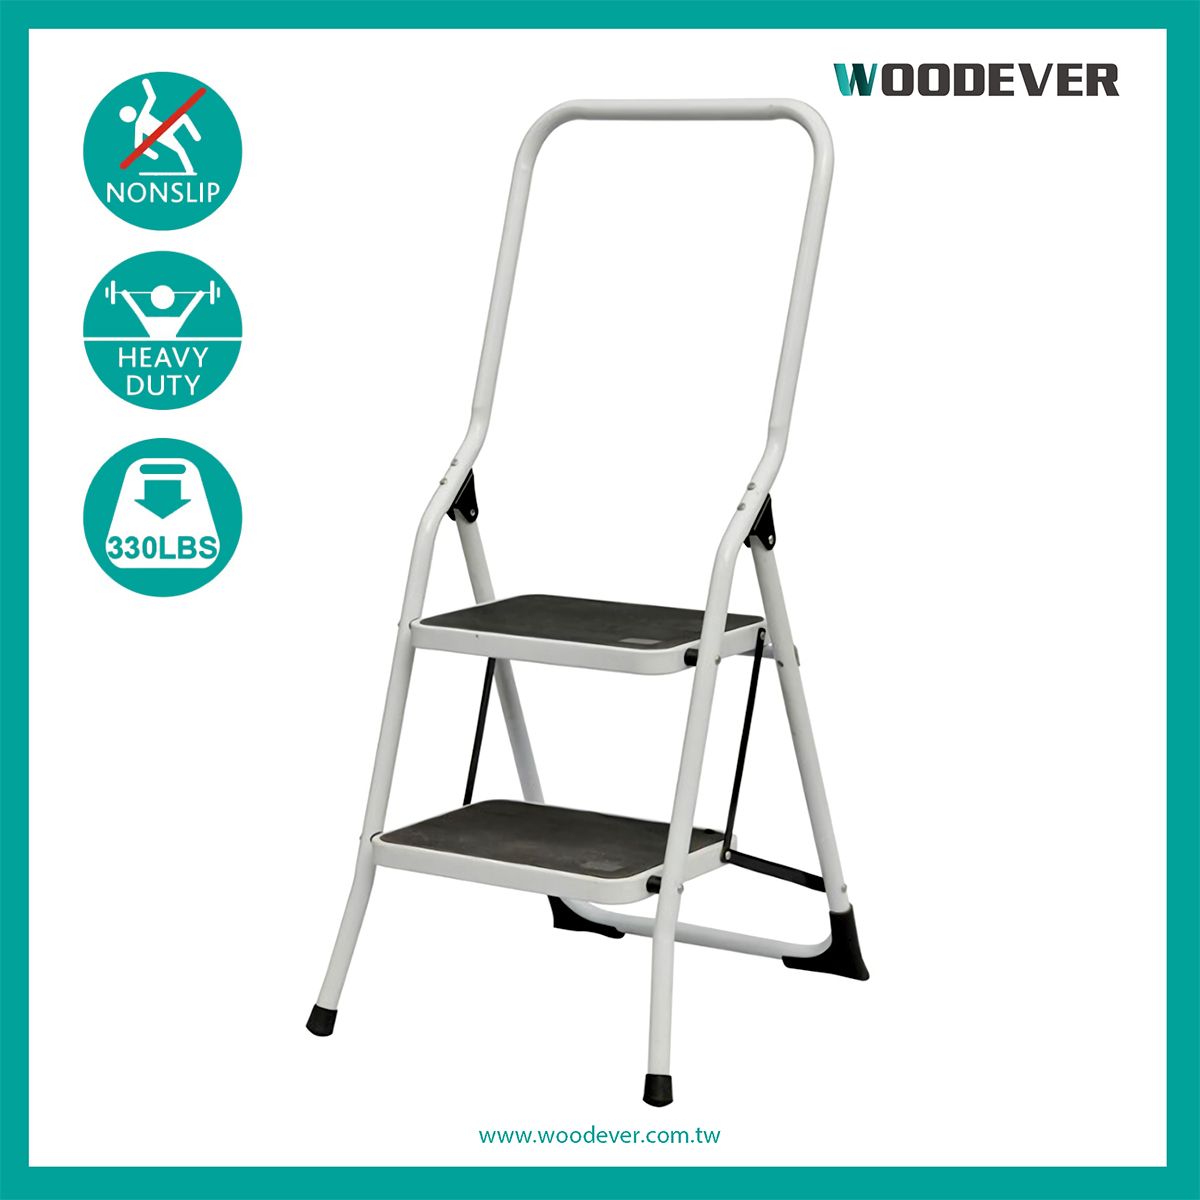 150 kg (330 lbs) steel step stool collapsible with large anti-slip pedals  Constructed from high-quality steel with a 0.9 mm tube thickness, this step stool is essential in design but impressive in its sturdy and stable features. 